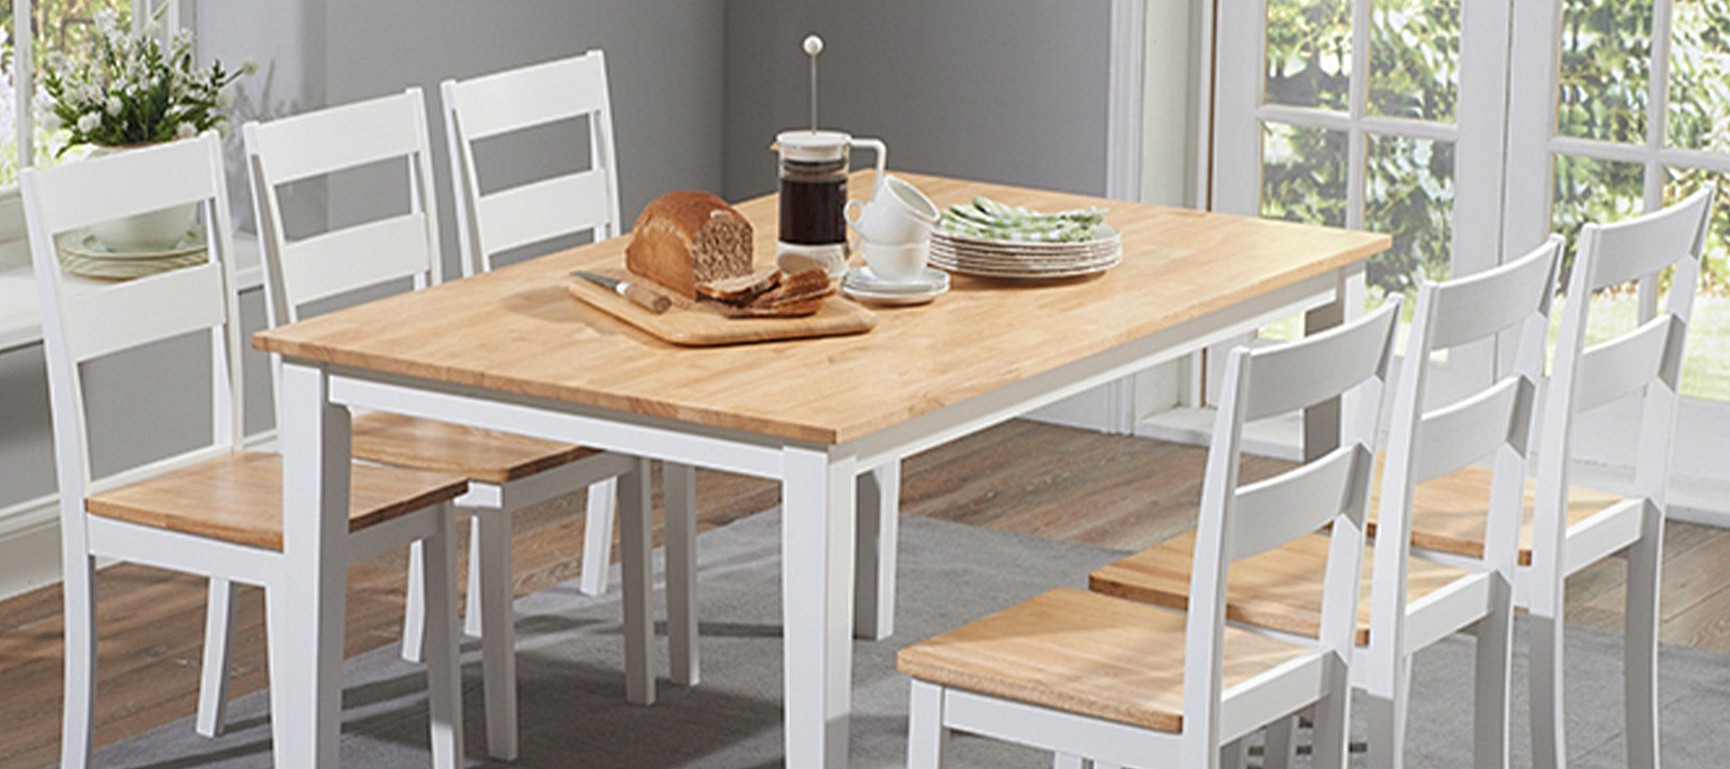 Chiltern 150cm Oak and White Dining Table Set with Chairs Chiltern